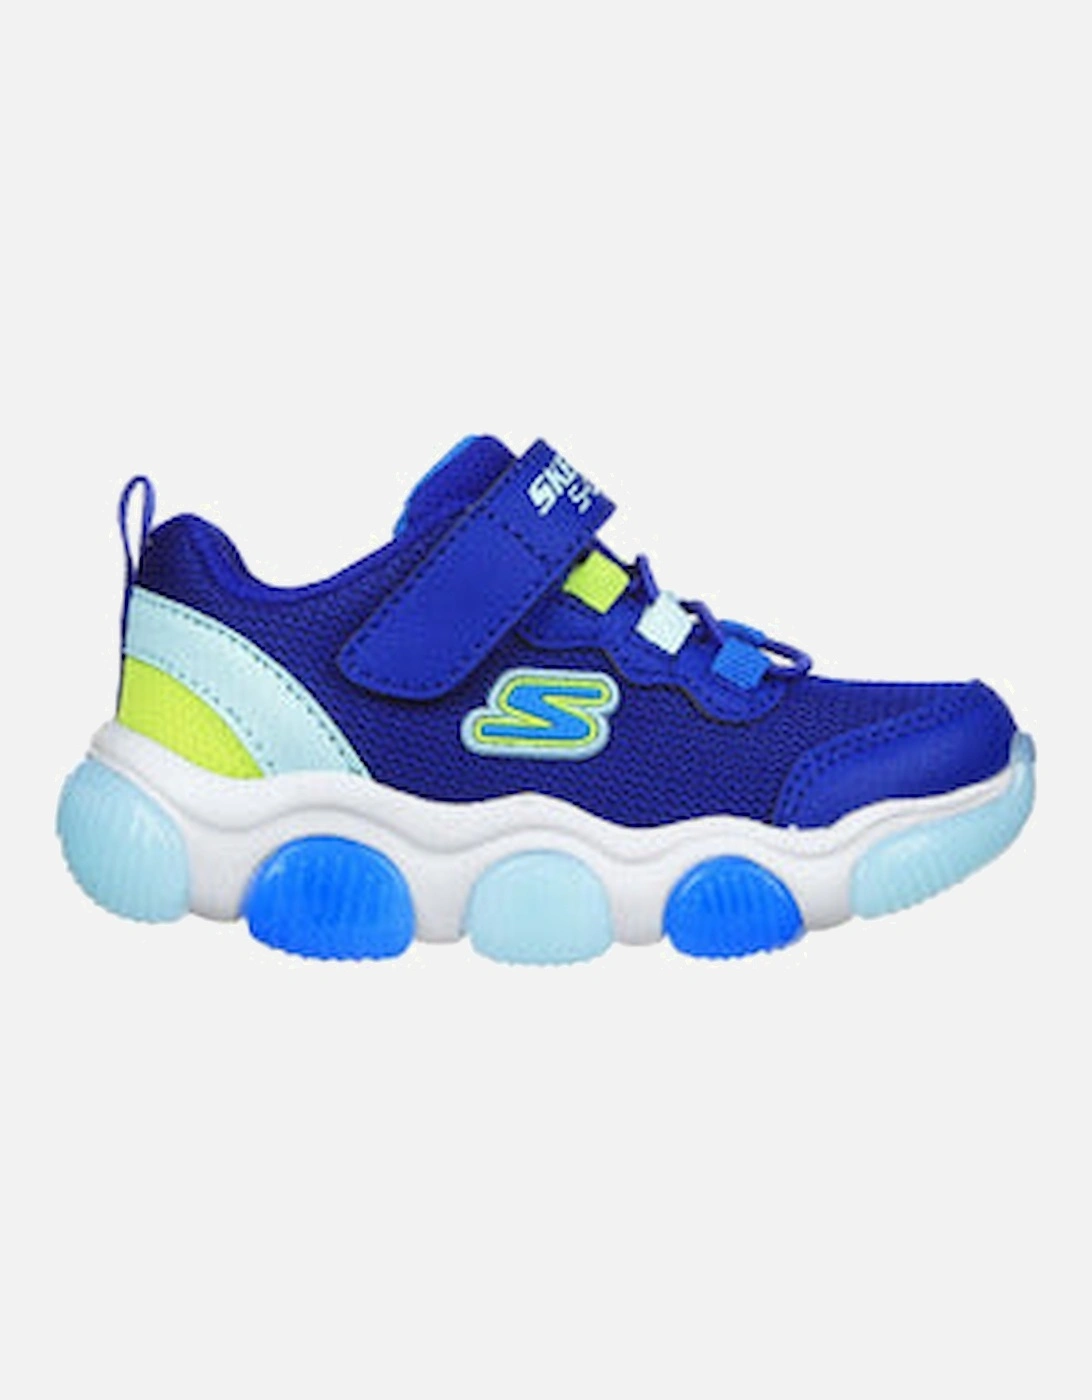 Kids trainers Might Glow blue lime 402040N, 2 of 1